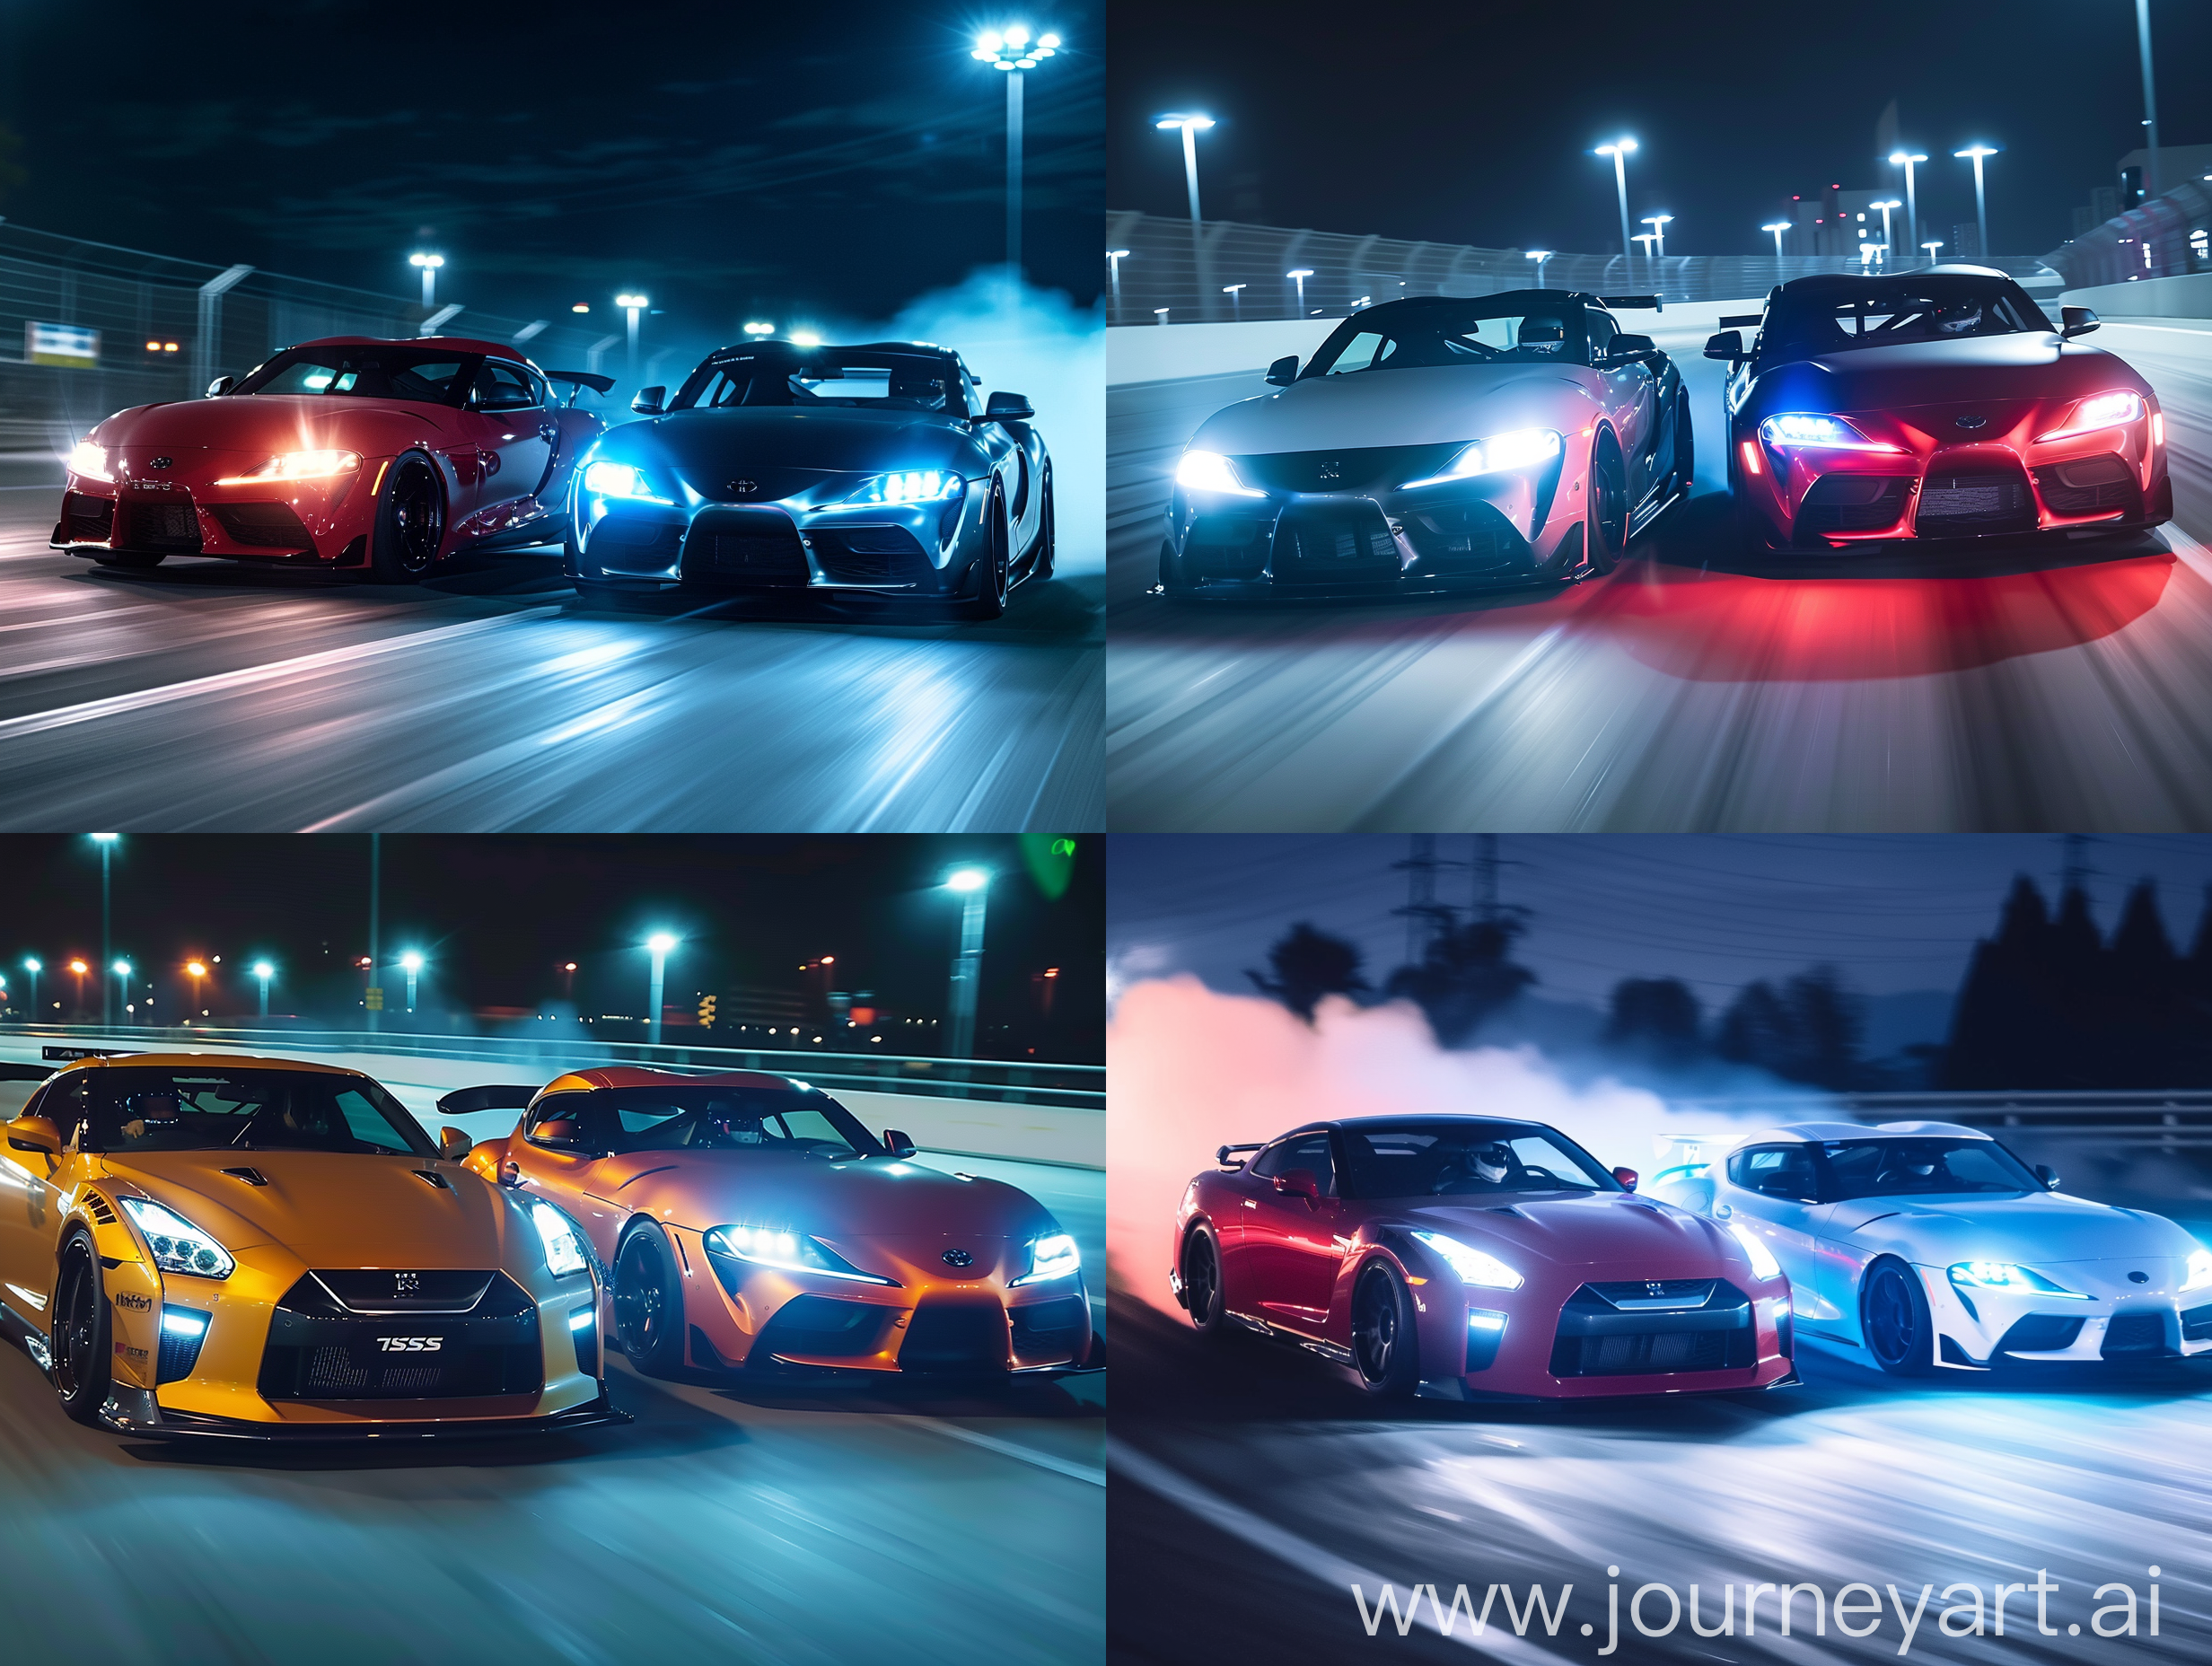 Make a concept car from Nissan GTR 34 and Toyota Supra at night driving drifting